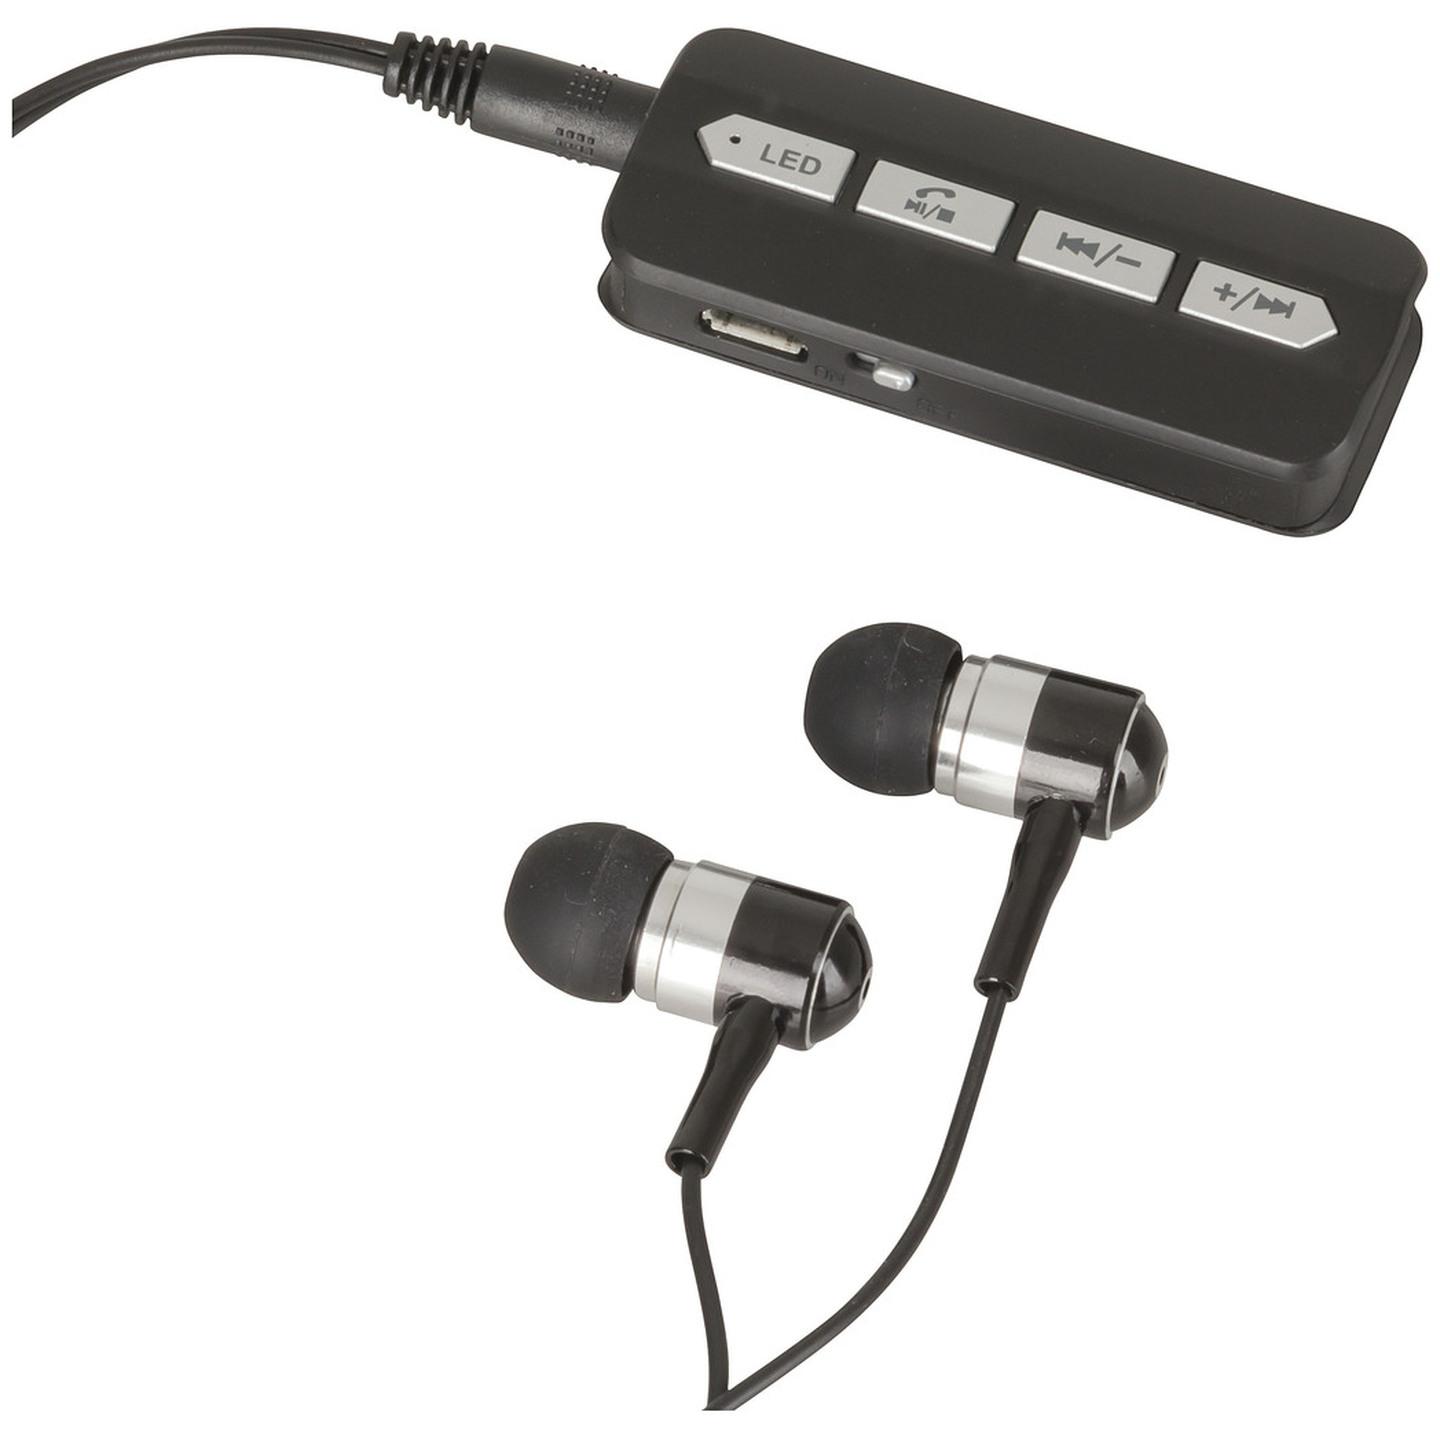 Rechargeable Bluetooth Audio Receiver with Earphones